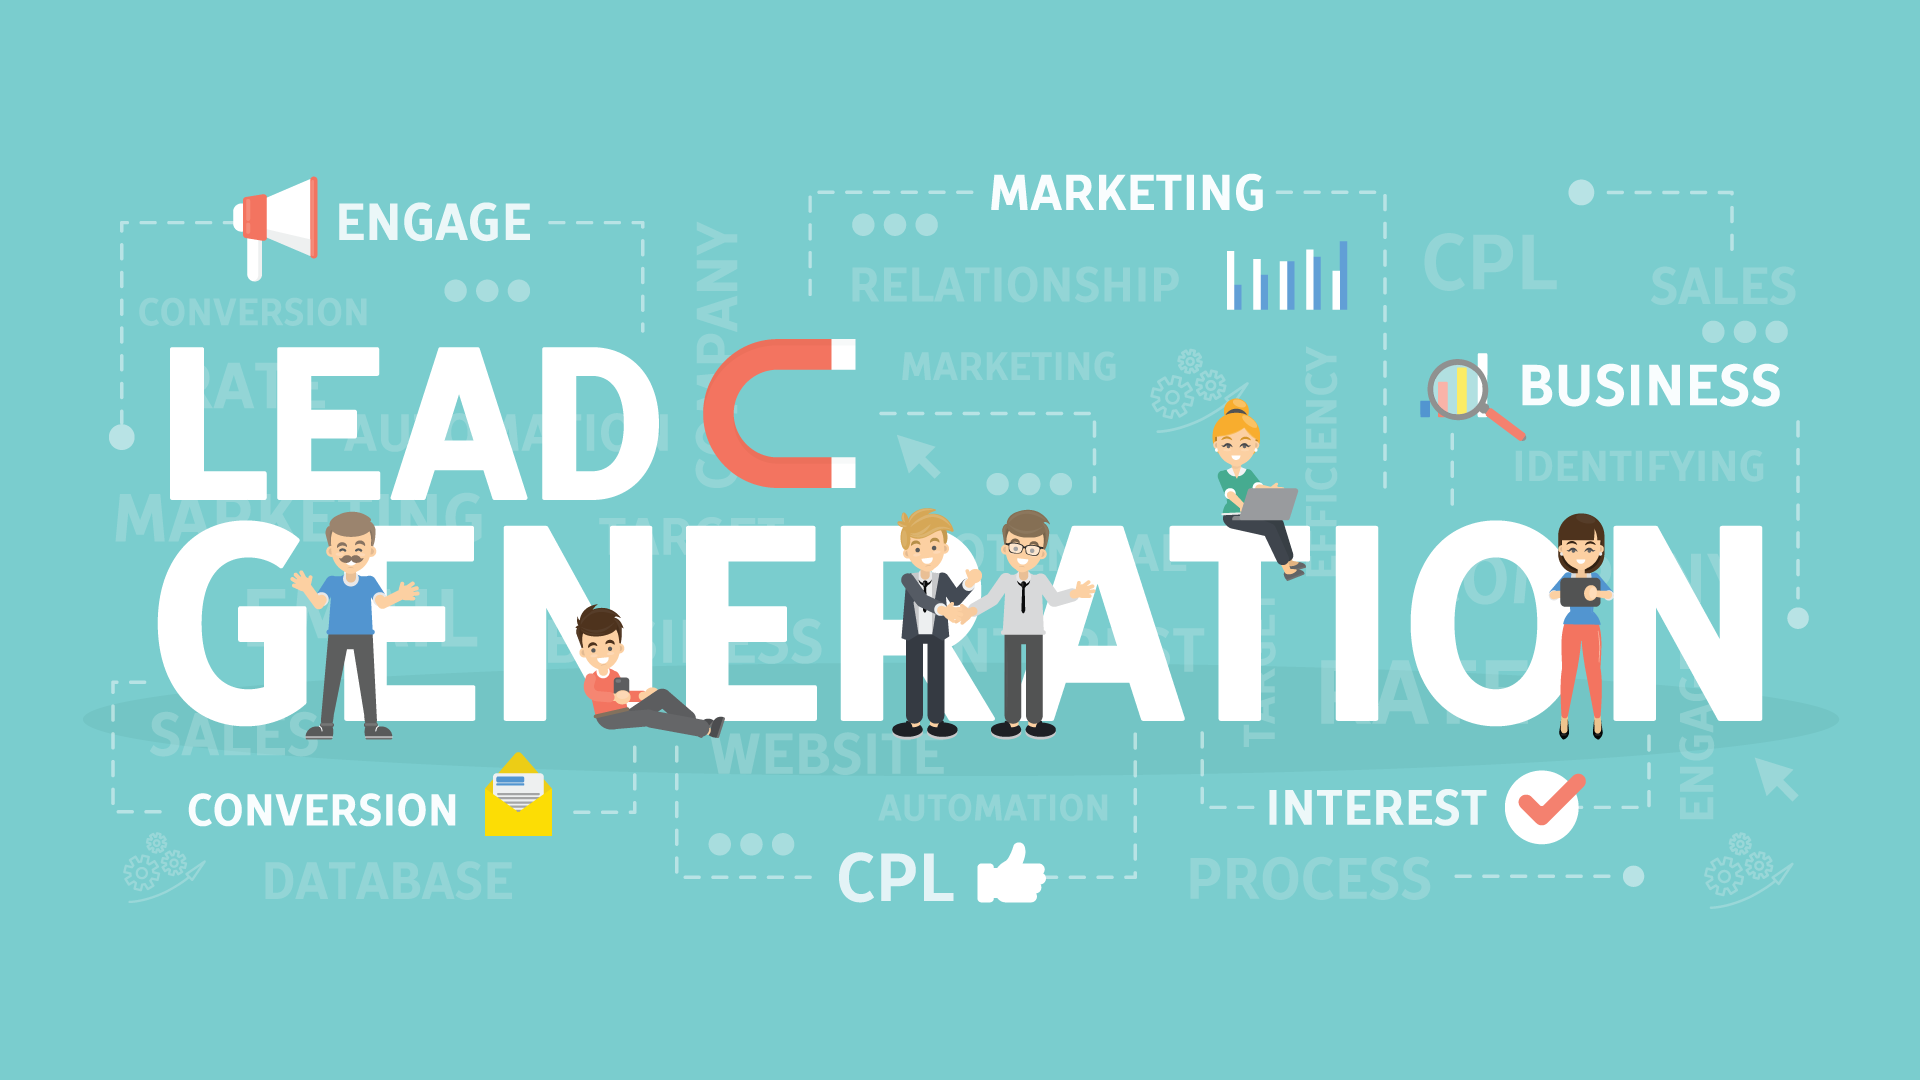 75 B2B Lead Generation Ideas and Tips for 2021